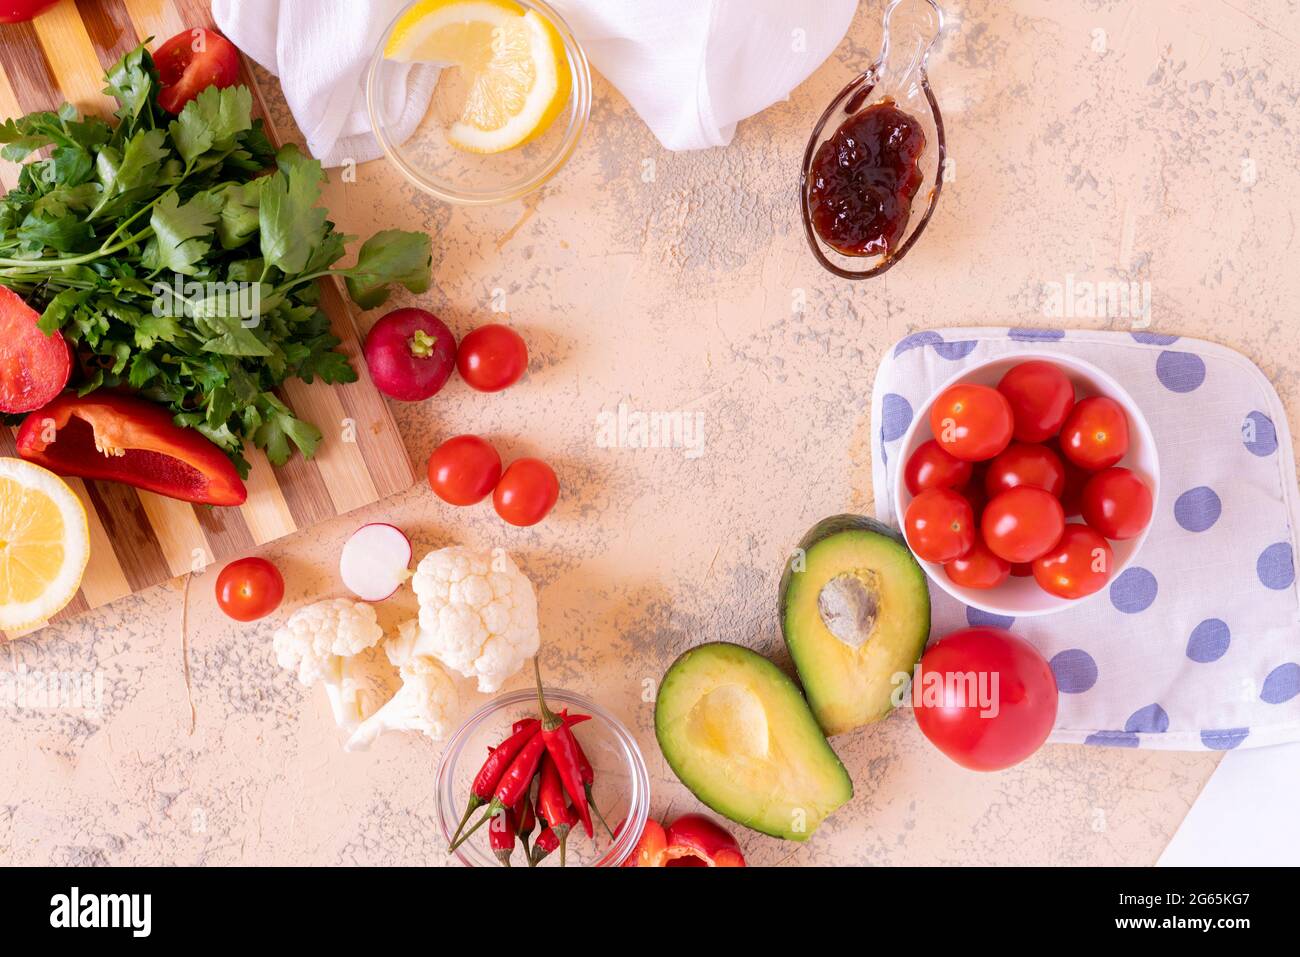 fresh sliced ingredients for detox sald, cut vegetables and fruits on the table Stock Photo